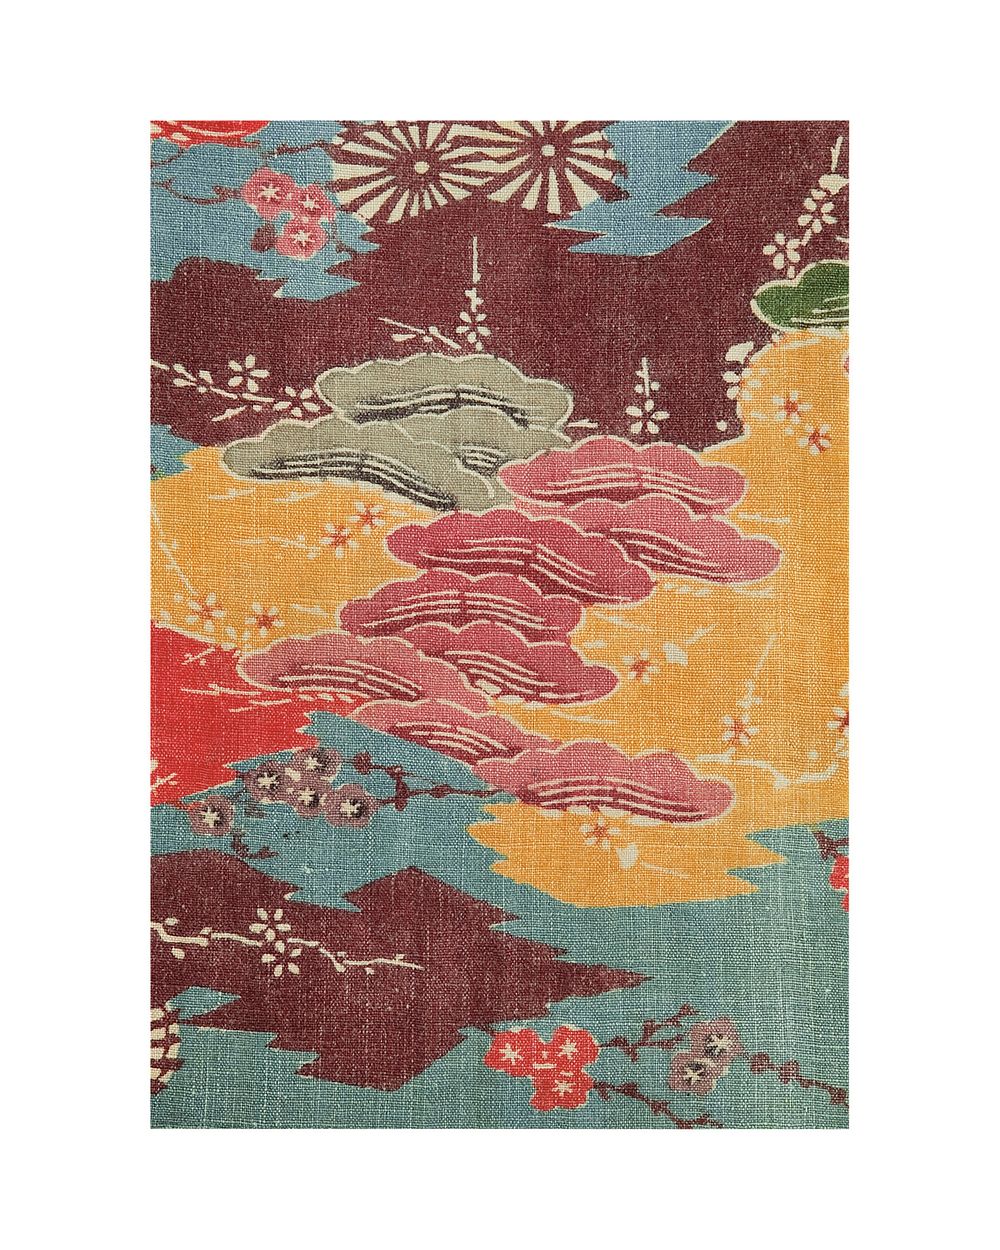 Fragment decorated with pine, plum, and chrysanthemum over stylized pine bark during 19th century textile in high…